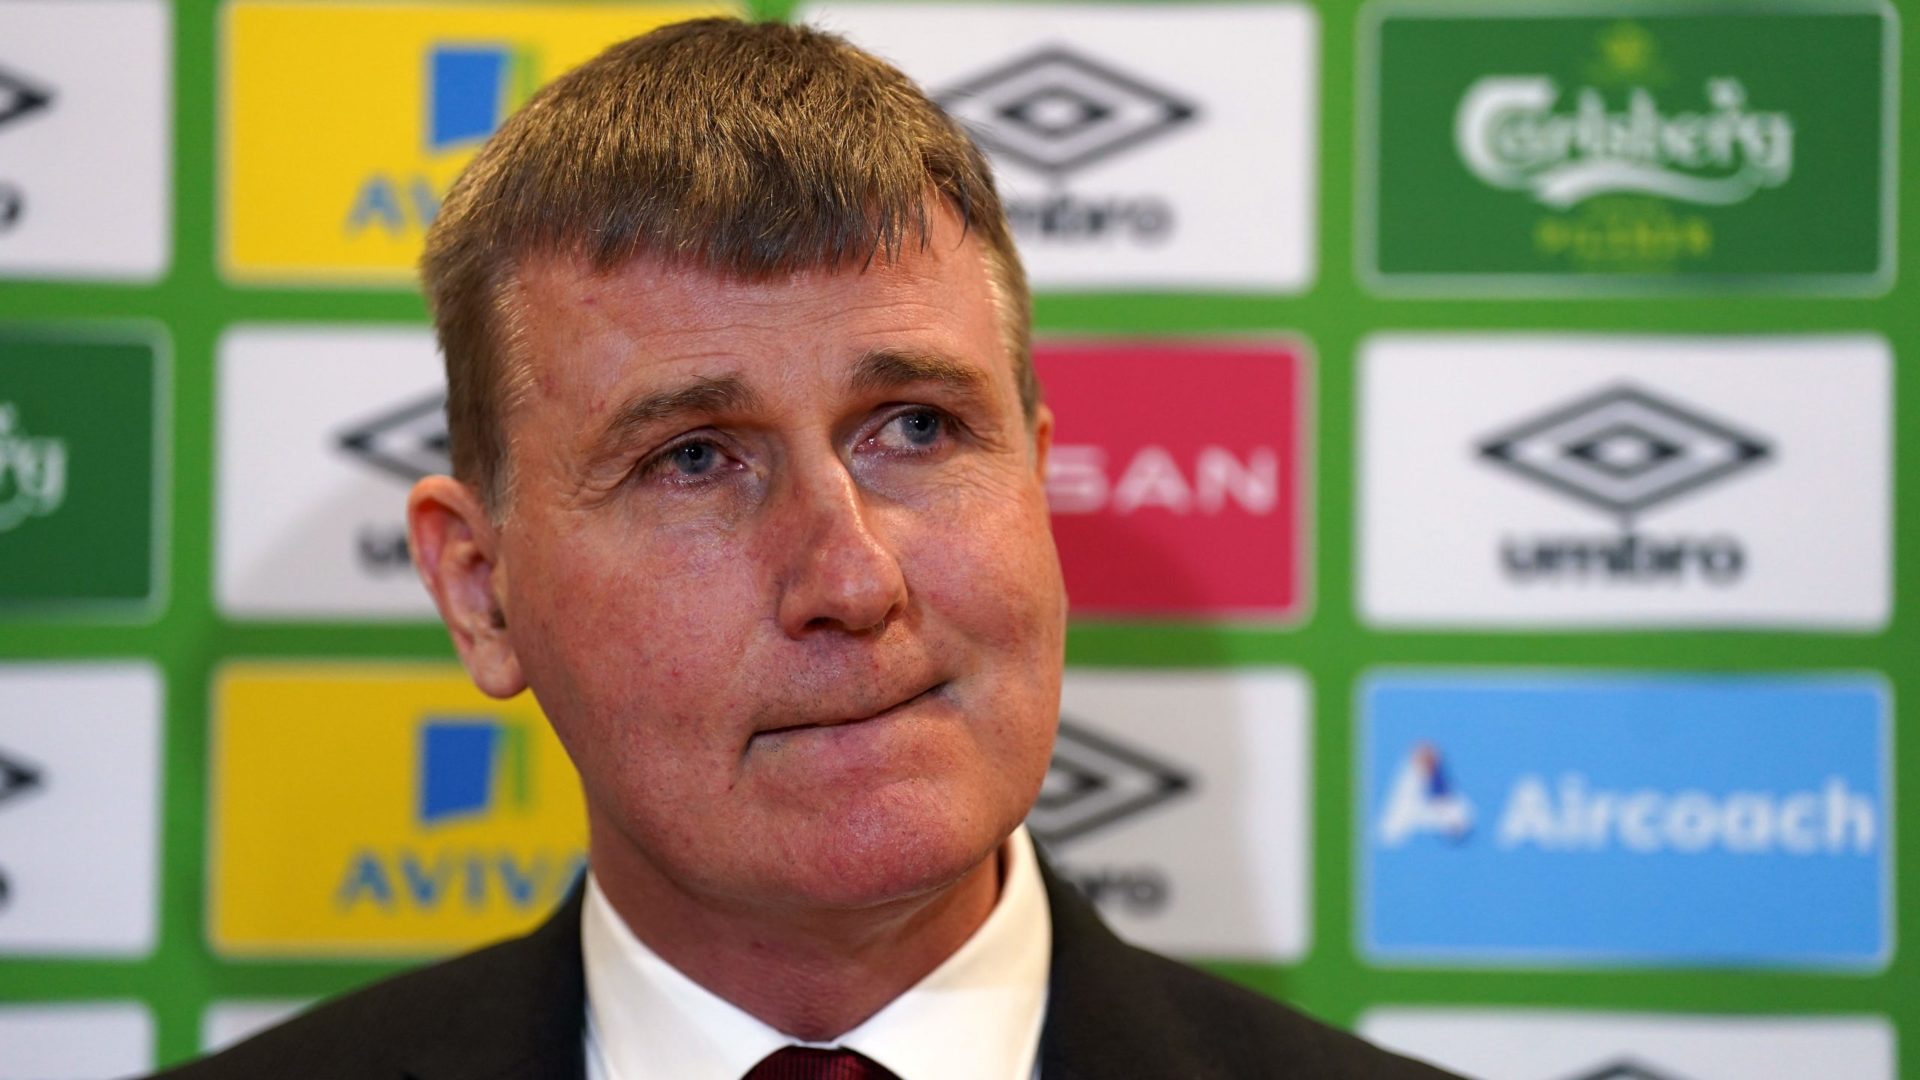 Stephen Kenny proud of the way his side reflects Republic of Ireland’s diversity